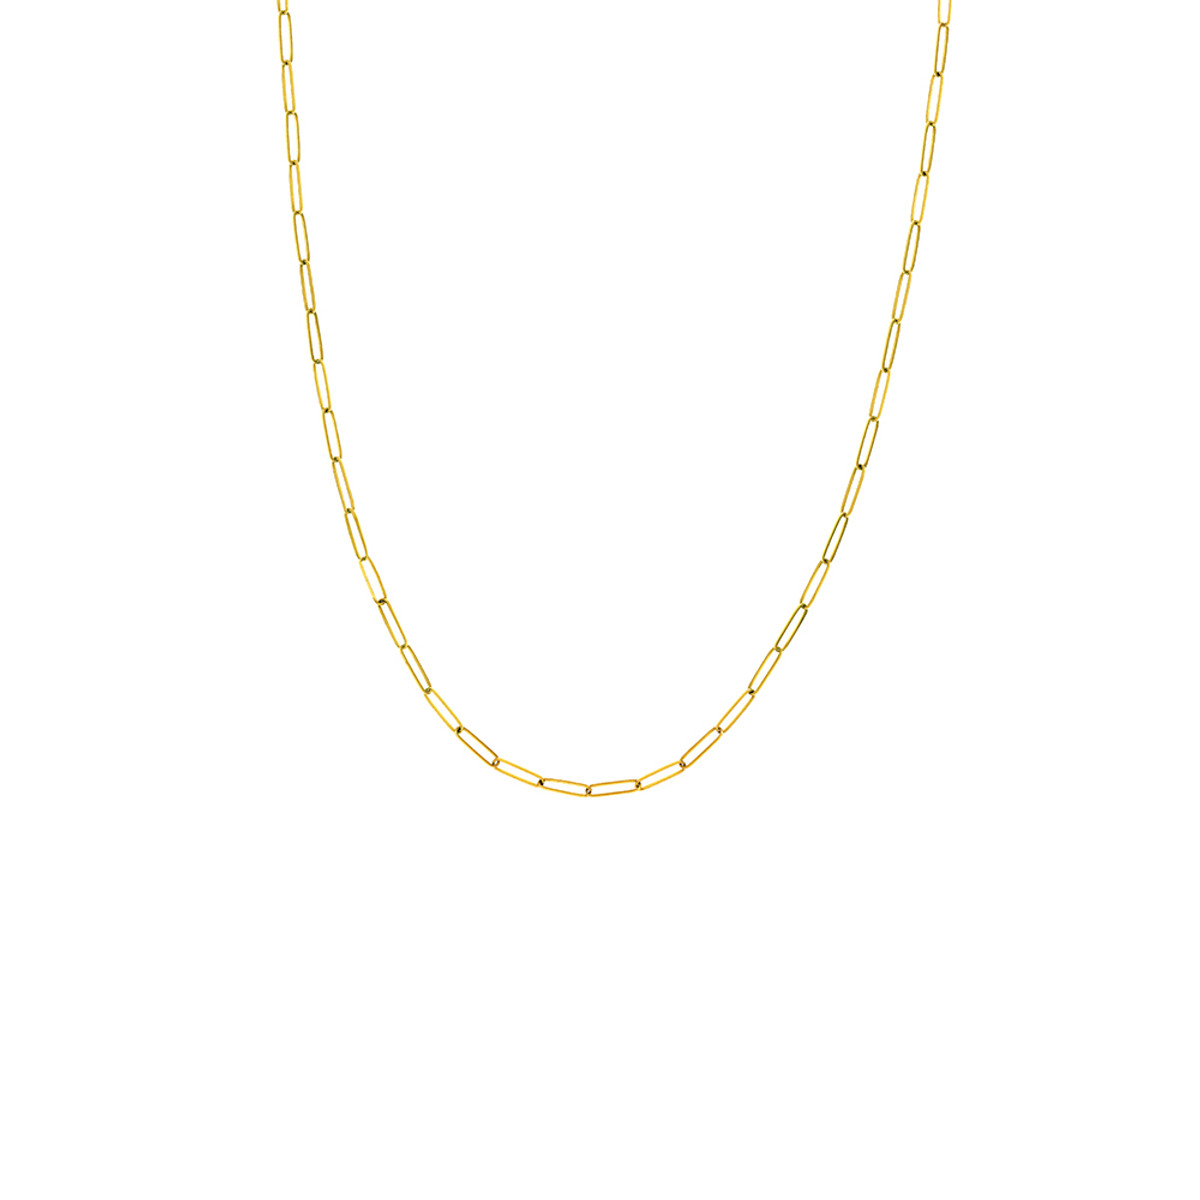 Hyde Park 14K Yellow Gold 20" 2.6mm Paperclip Chain-23778 Product Image